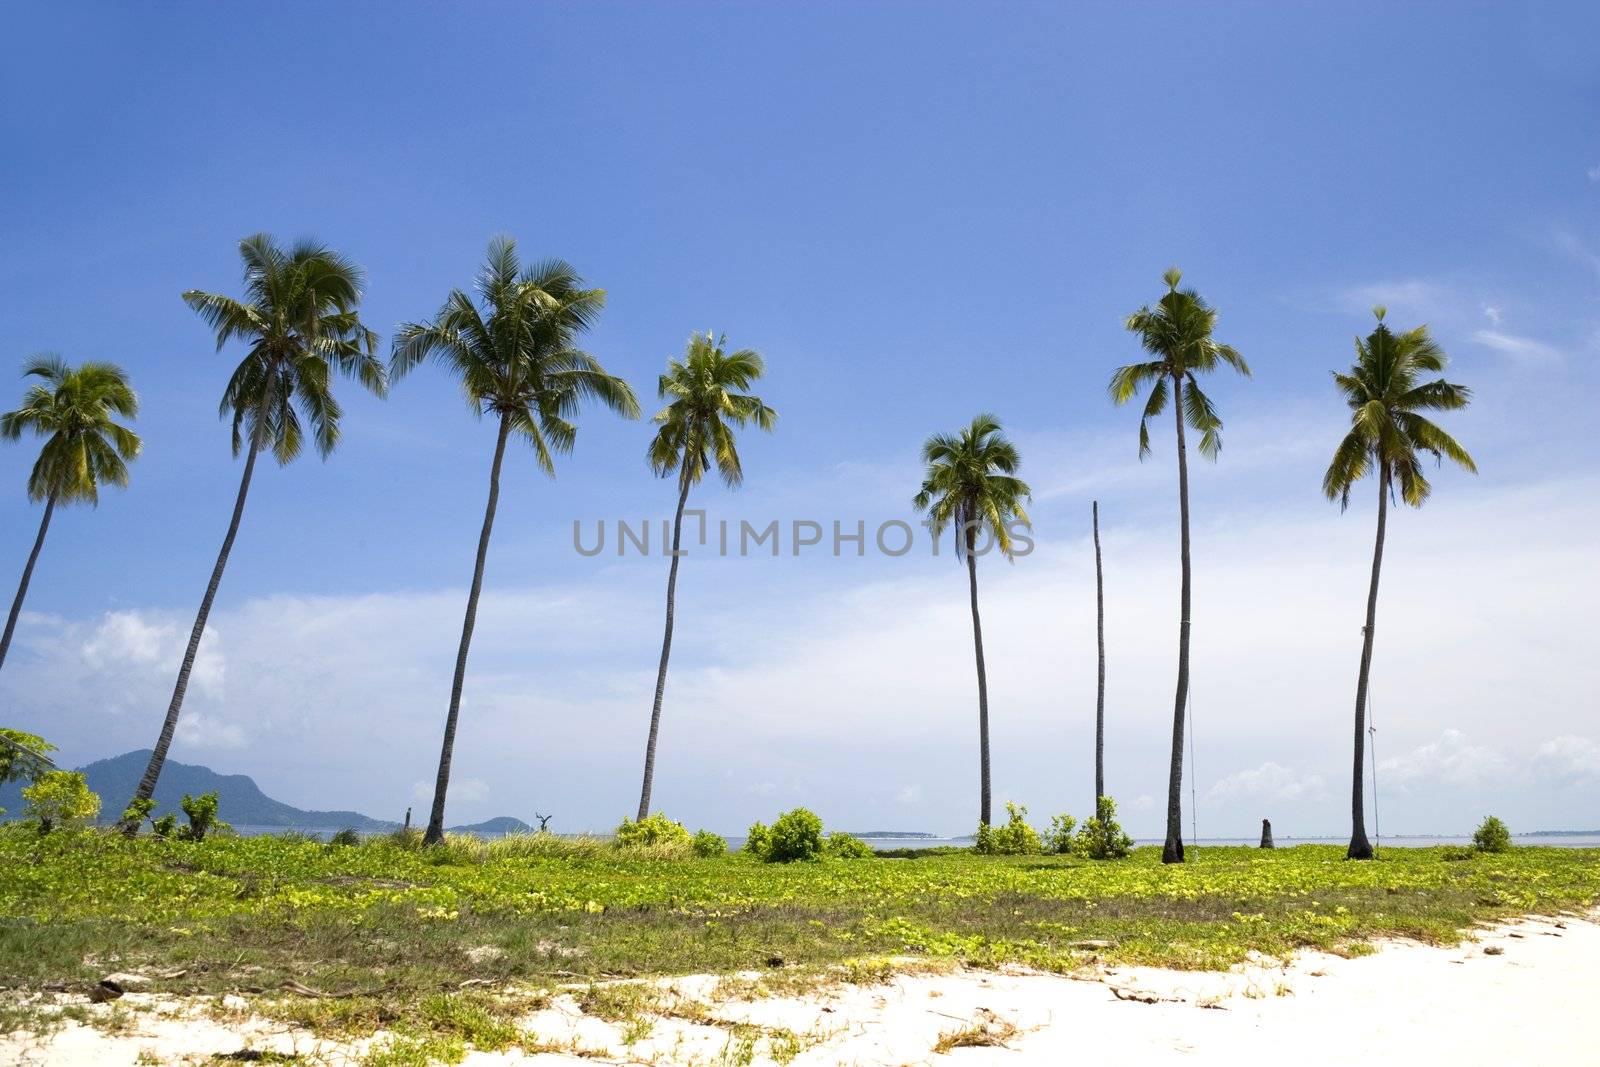 Image of coconut trees on a remote Malaysian tropical island.